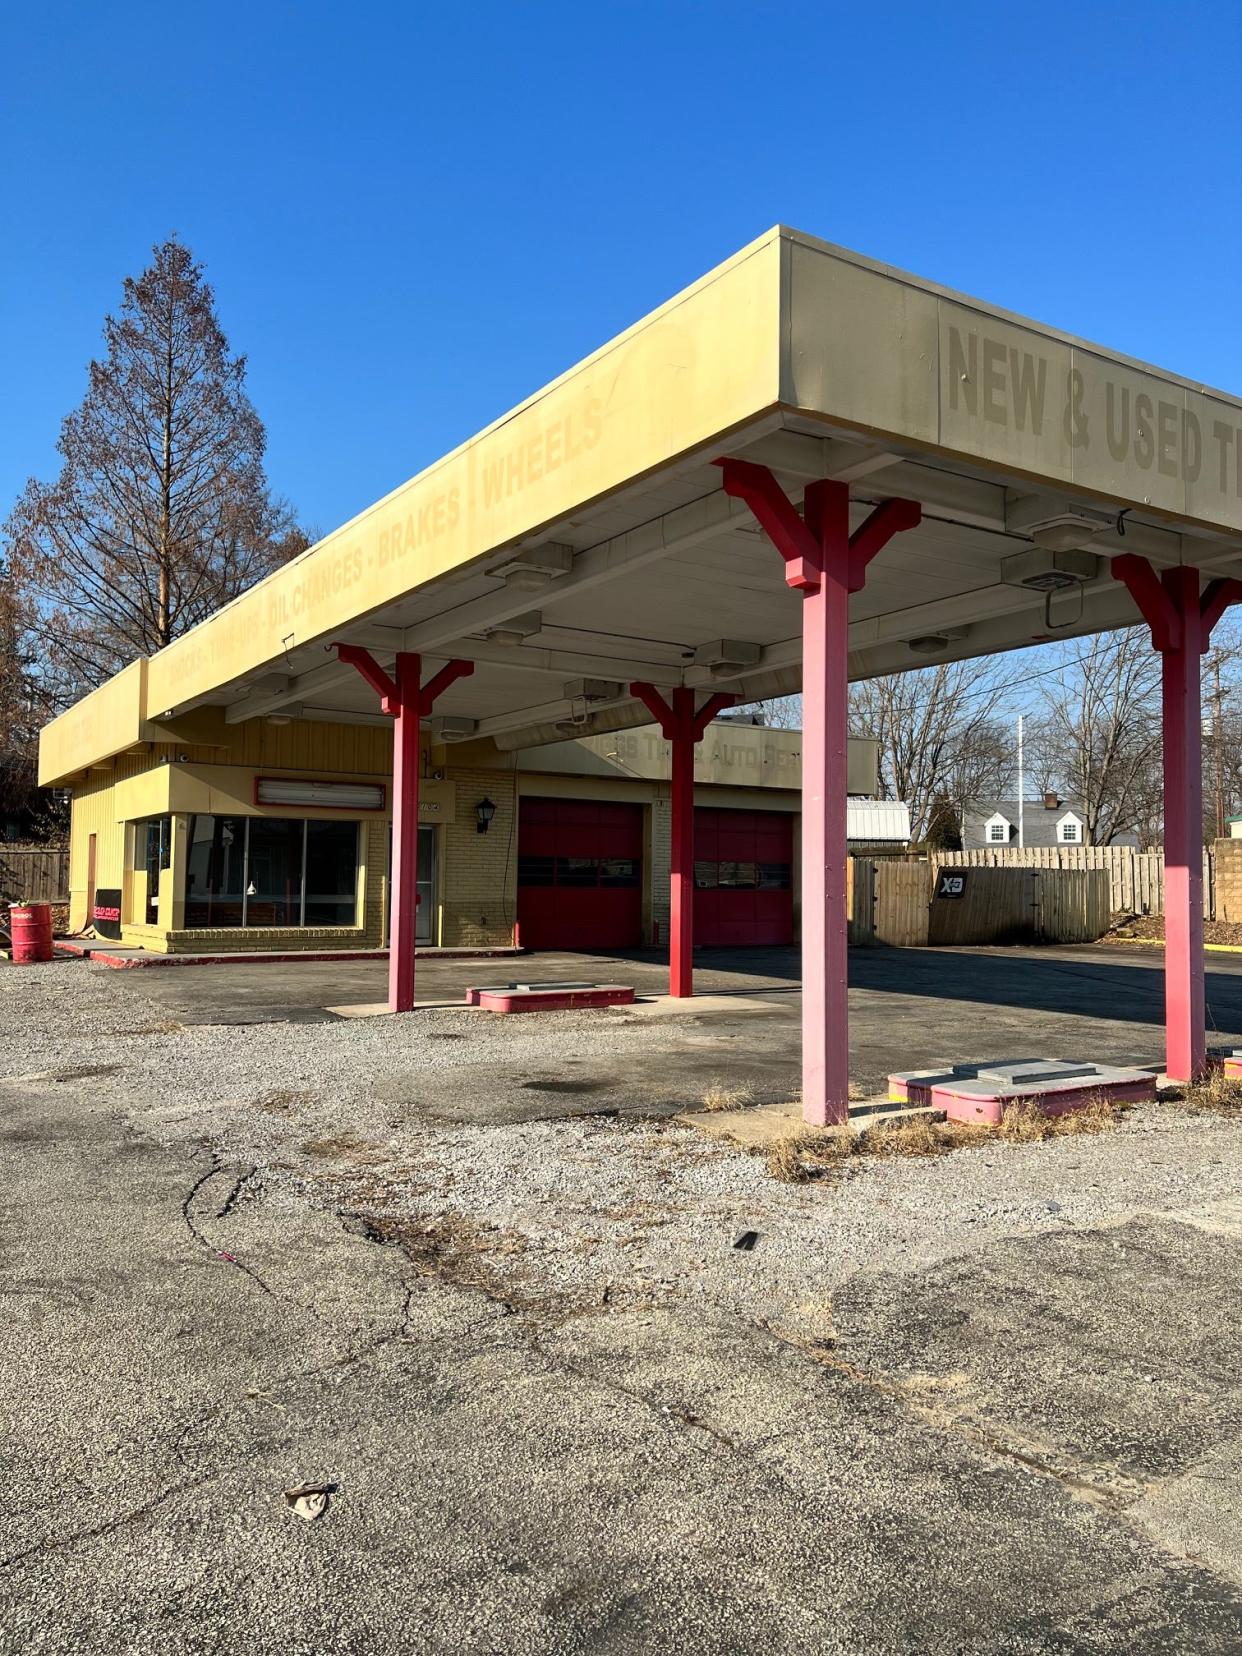 Above the Dirt Garden Shop in Jeffersontown was previously a service station before being renovated into a plant shop.